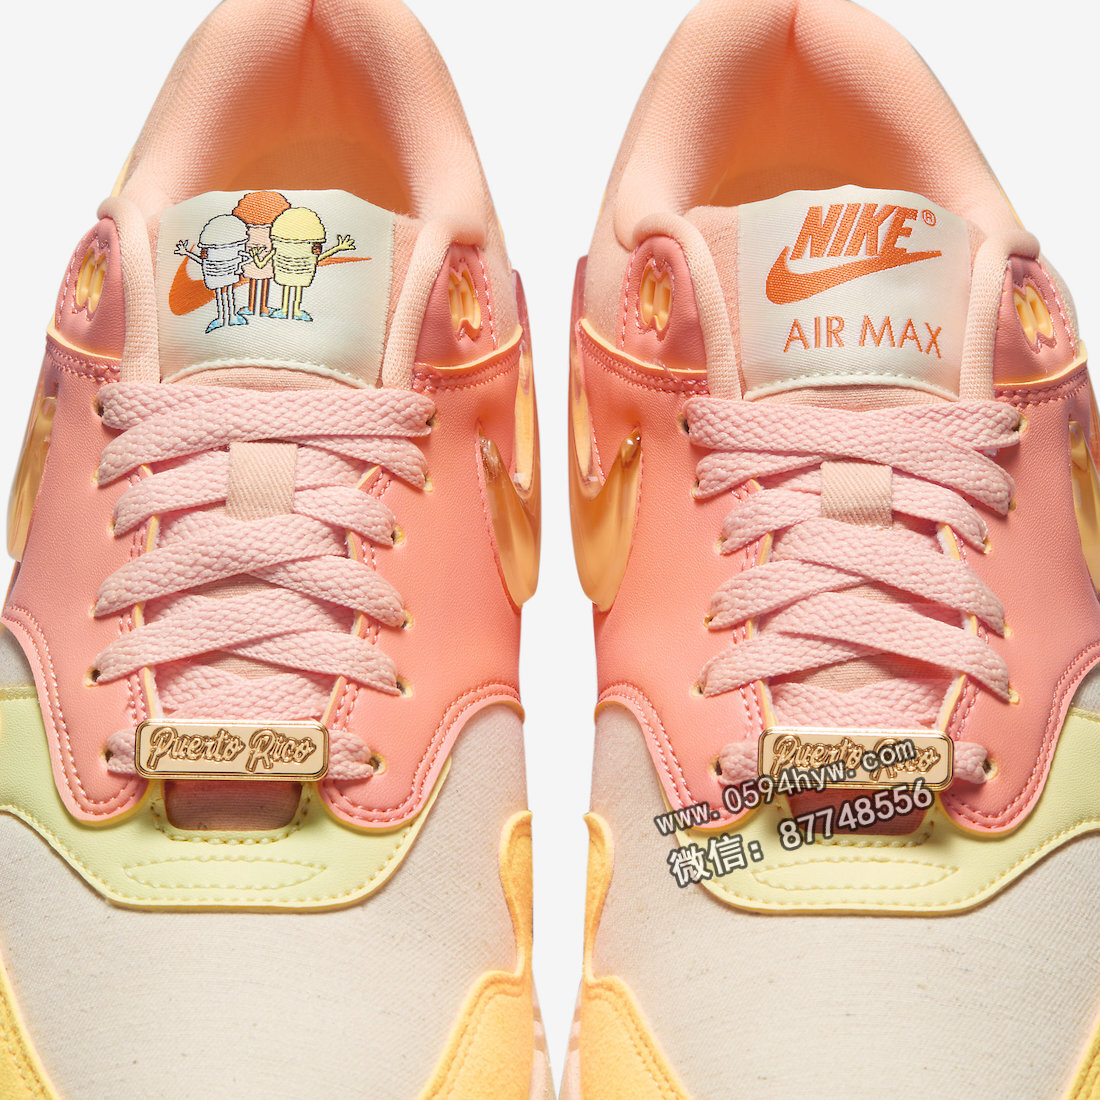 Nike-Air-Max-1-Puerto-Rico-Orange-Frost-FD6955-800-Release-Date-8